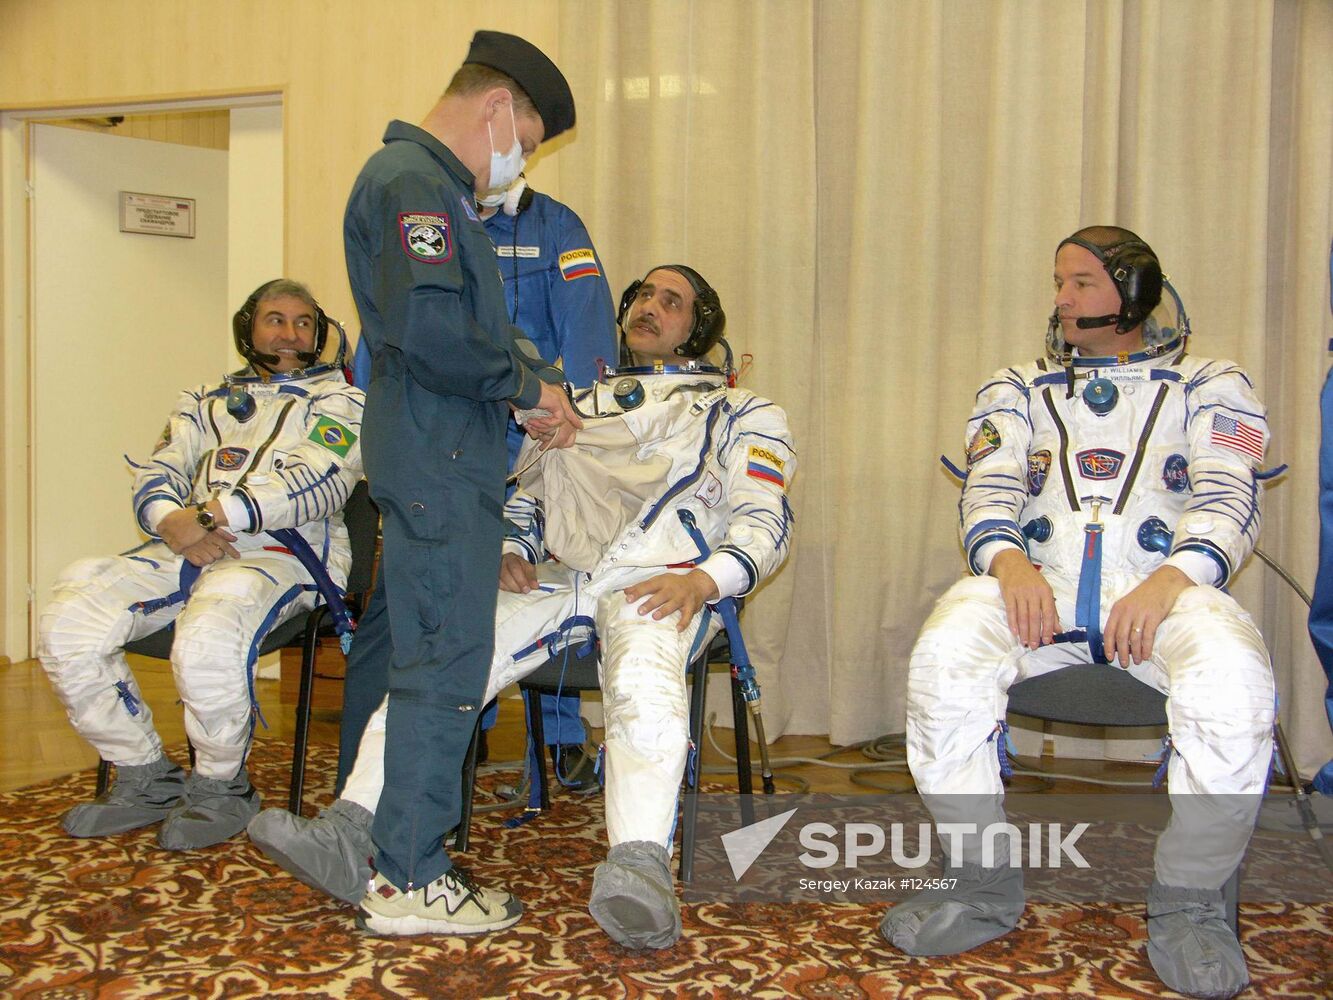 TRYING ON SPACESUITS